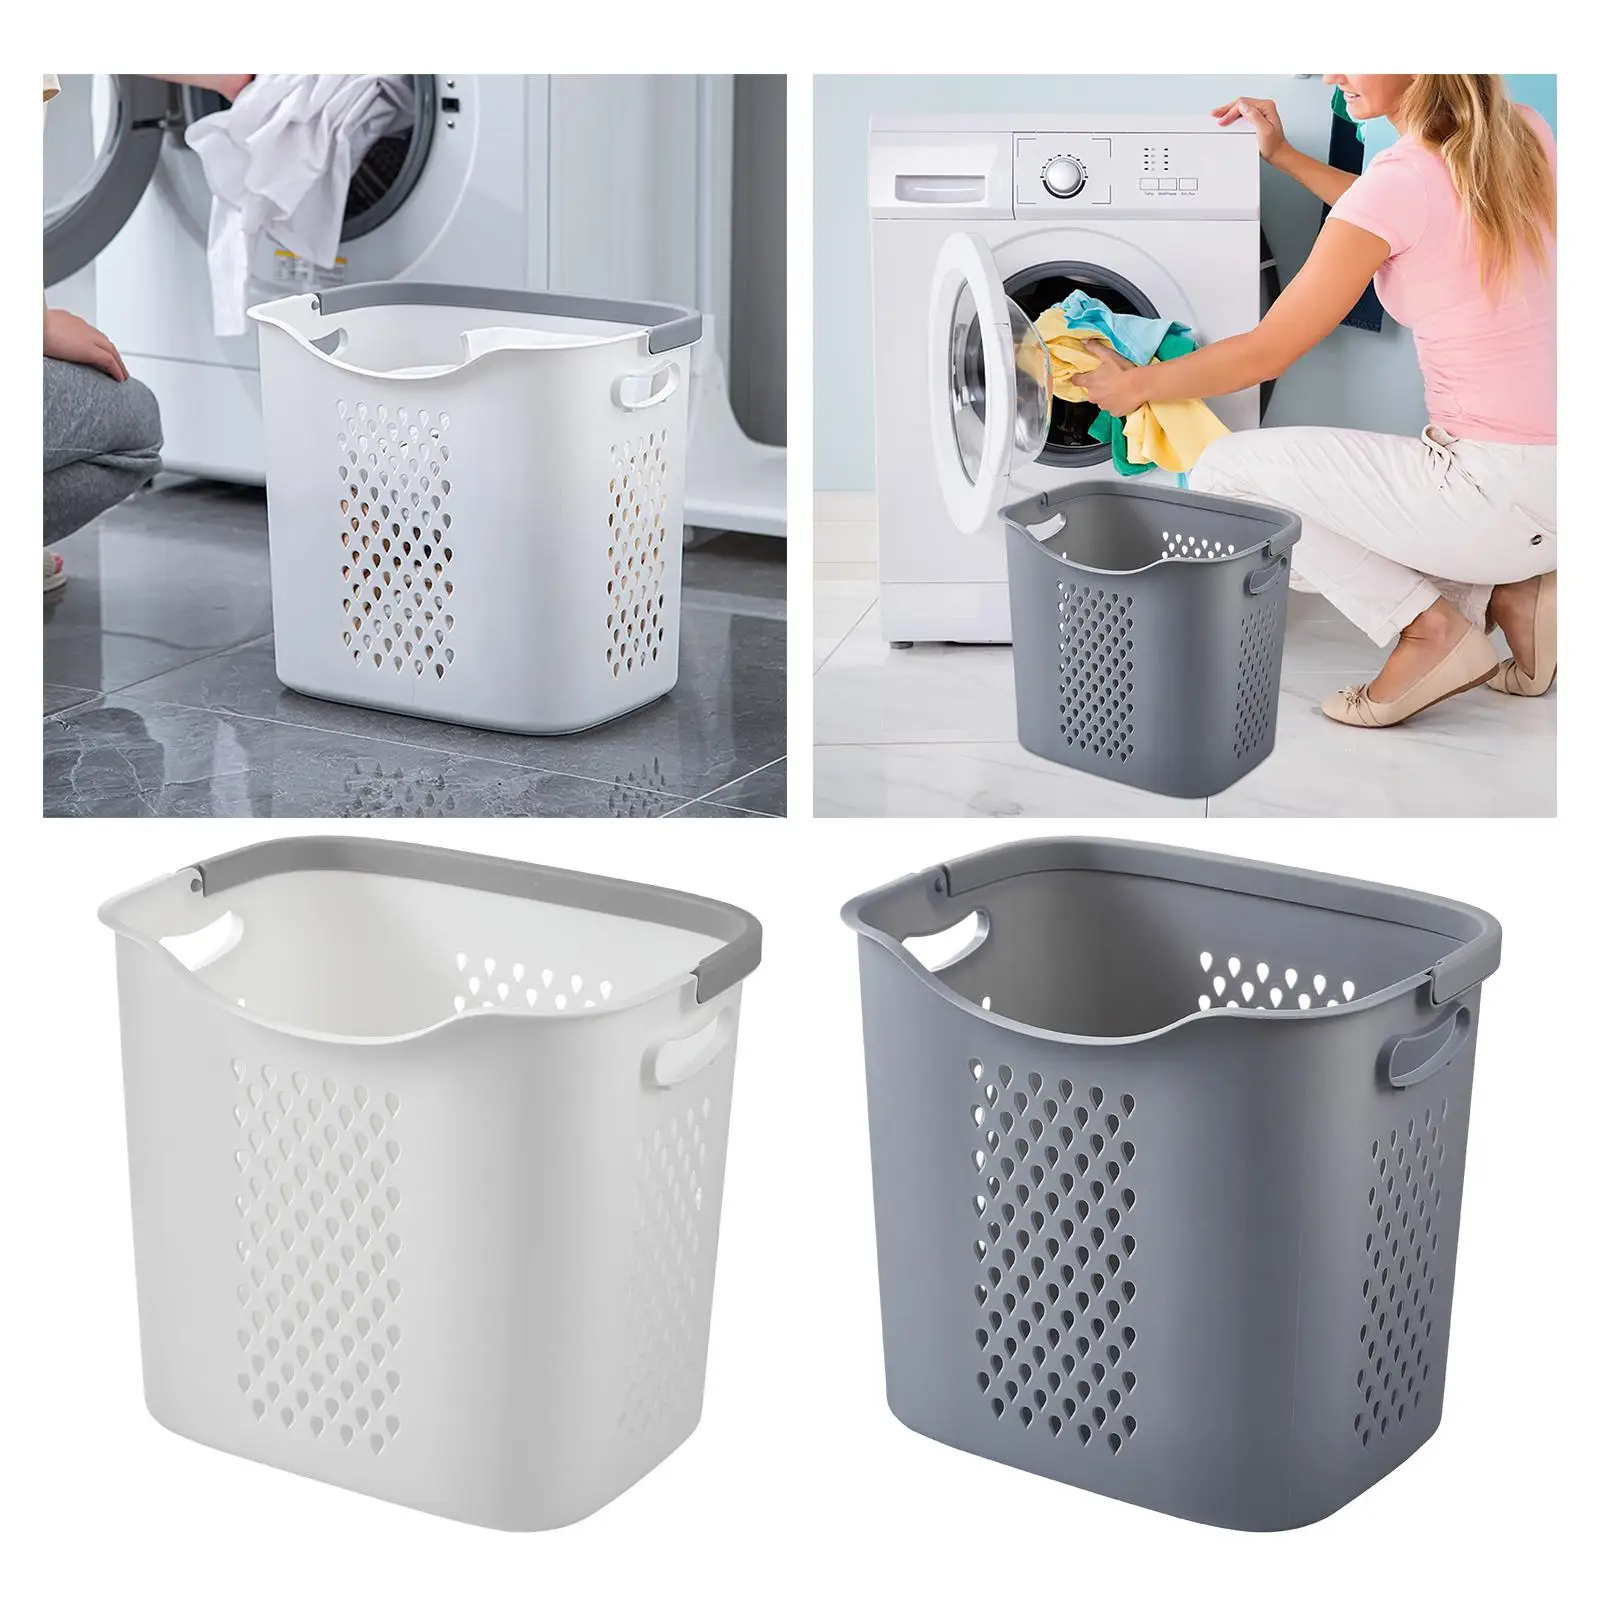 Laundry Basket Dirty Clothes Basket, Freestanding for Dorm Living Room Toys Shoes